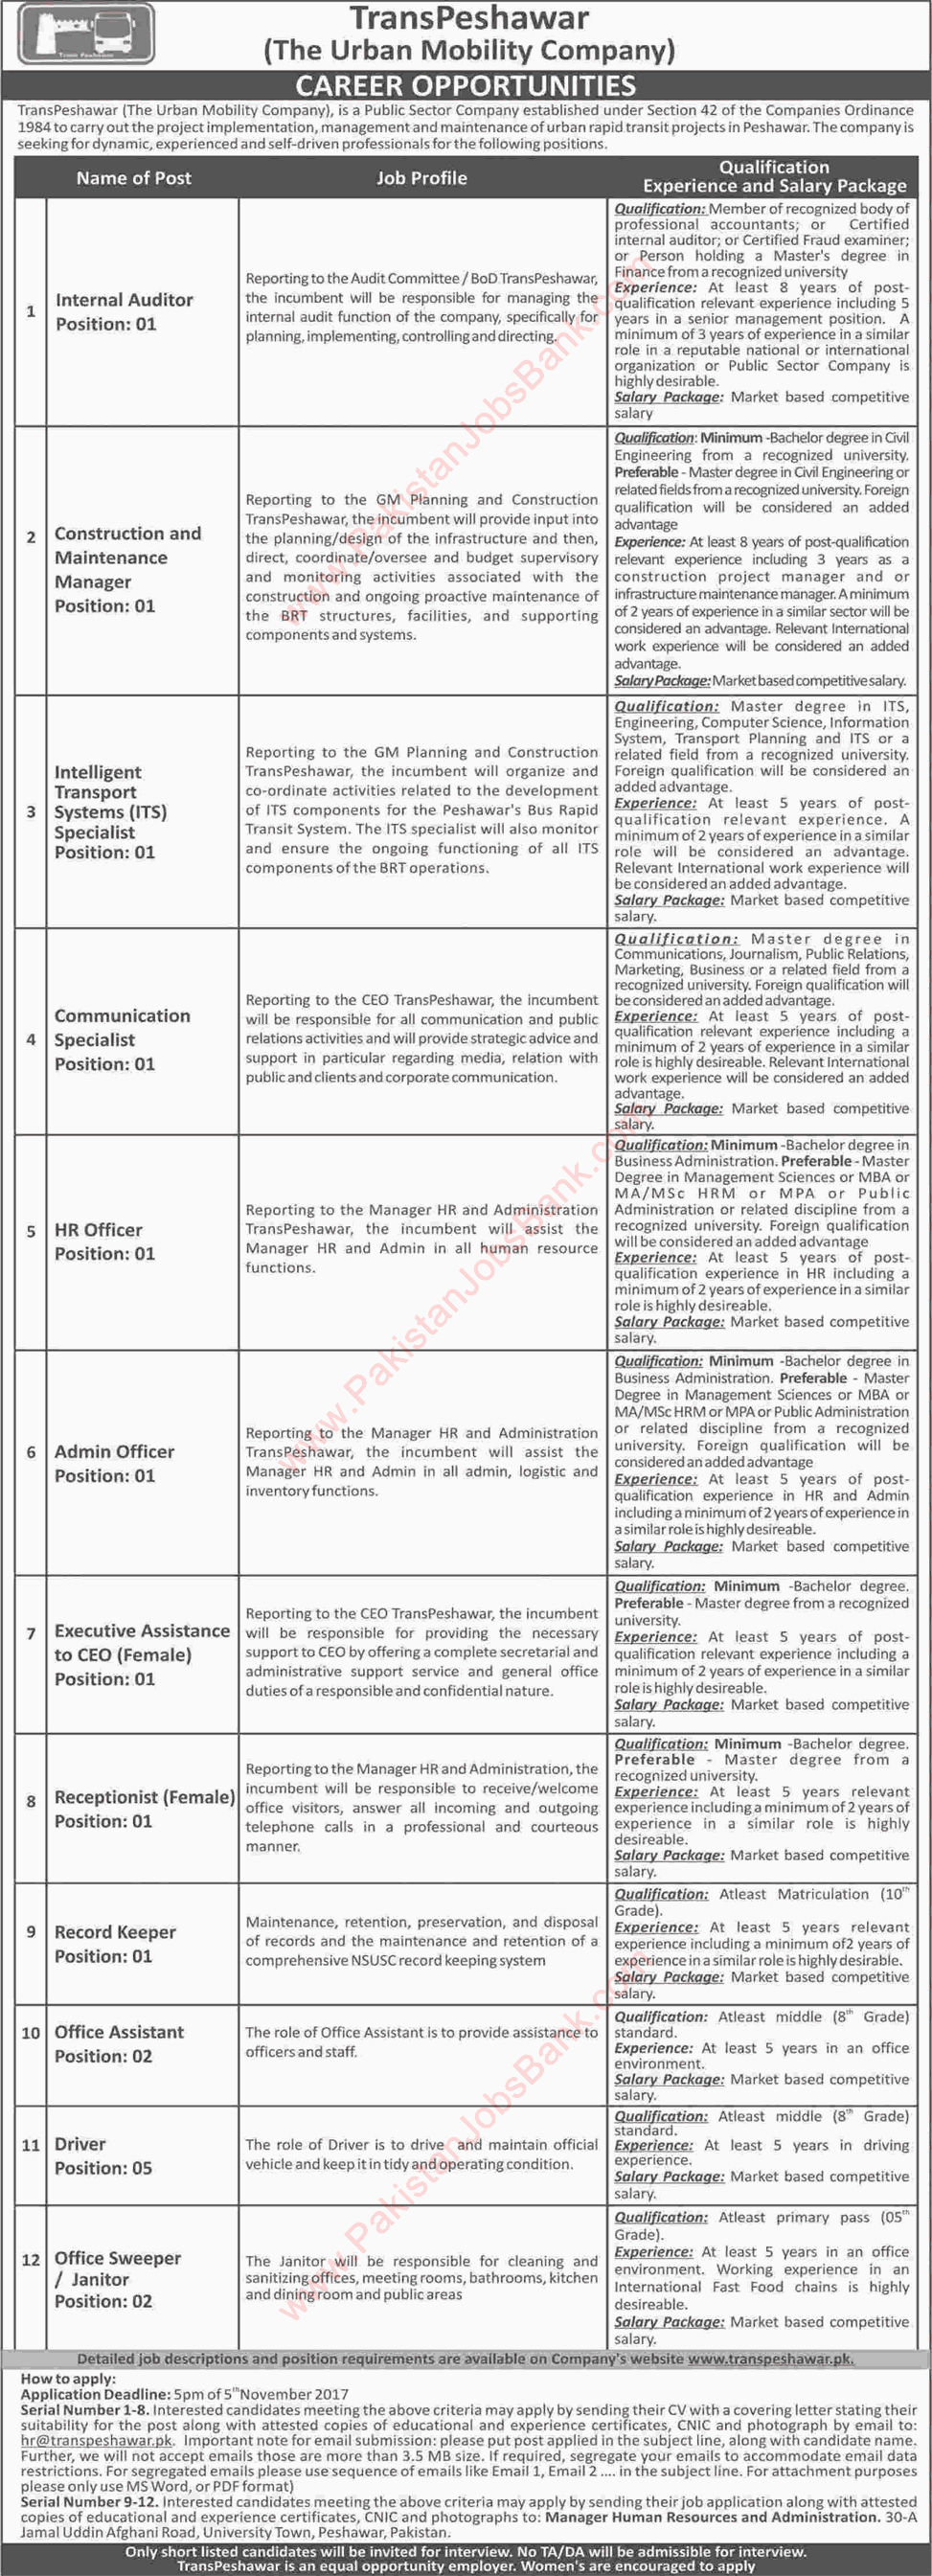 Trans Peshawar Jobs October 2017 Office Assistants, Receptionist, Drivers & Others Latest